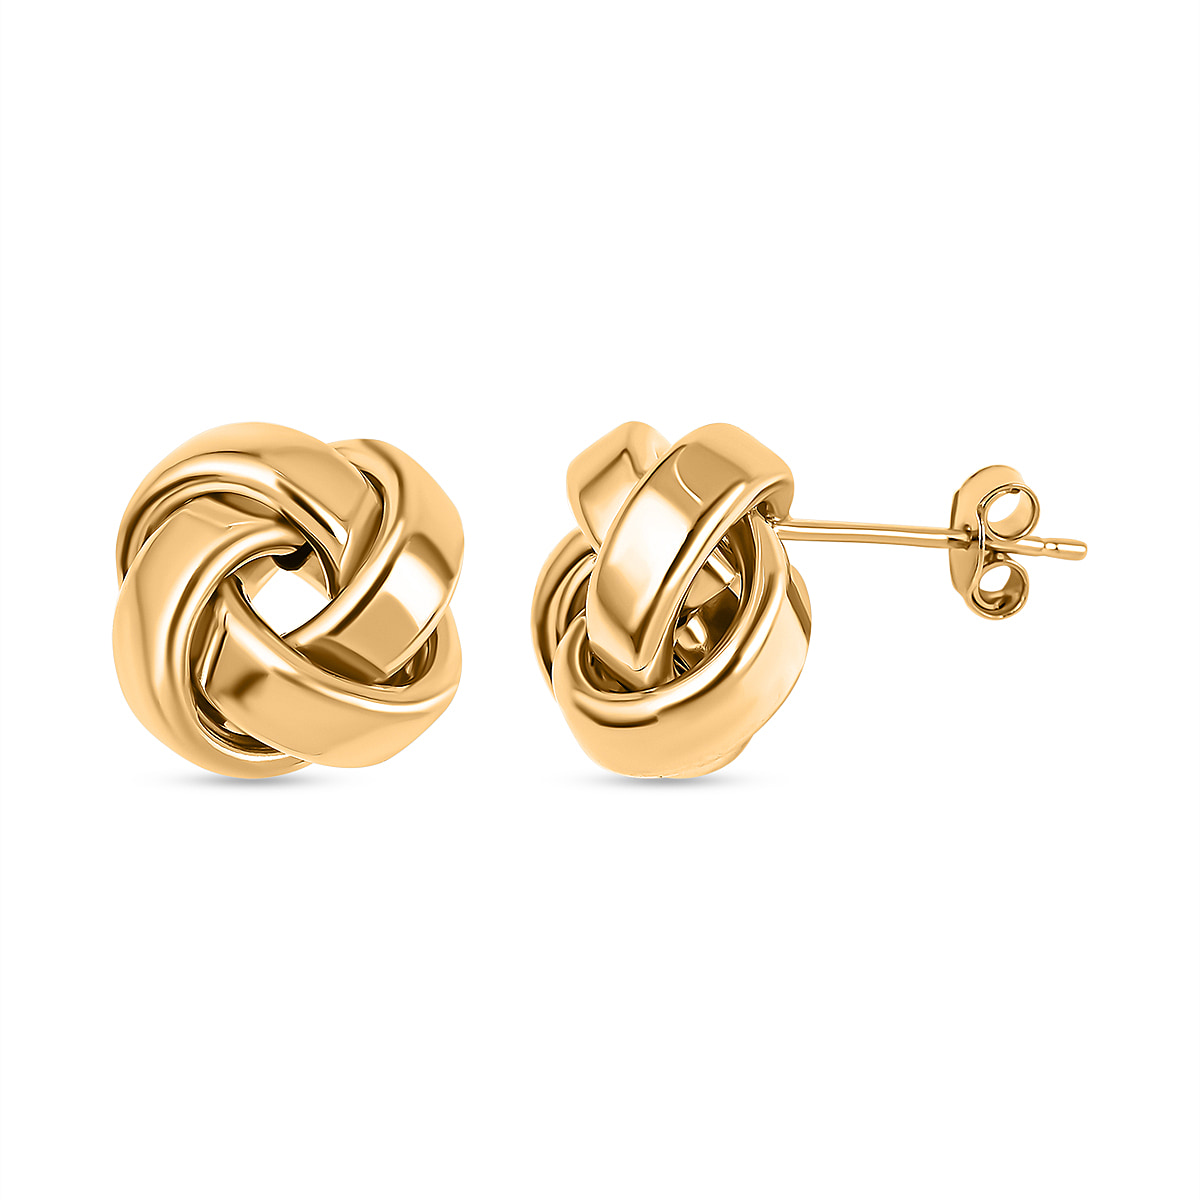 Vicenza Closeout - 9K Yellow Gold Knot Earrings